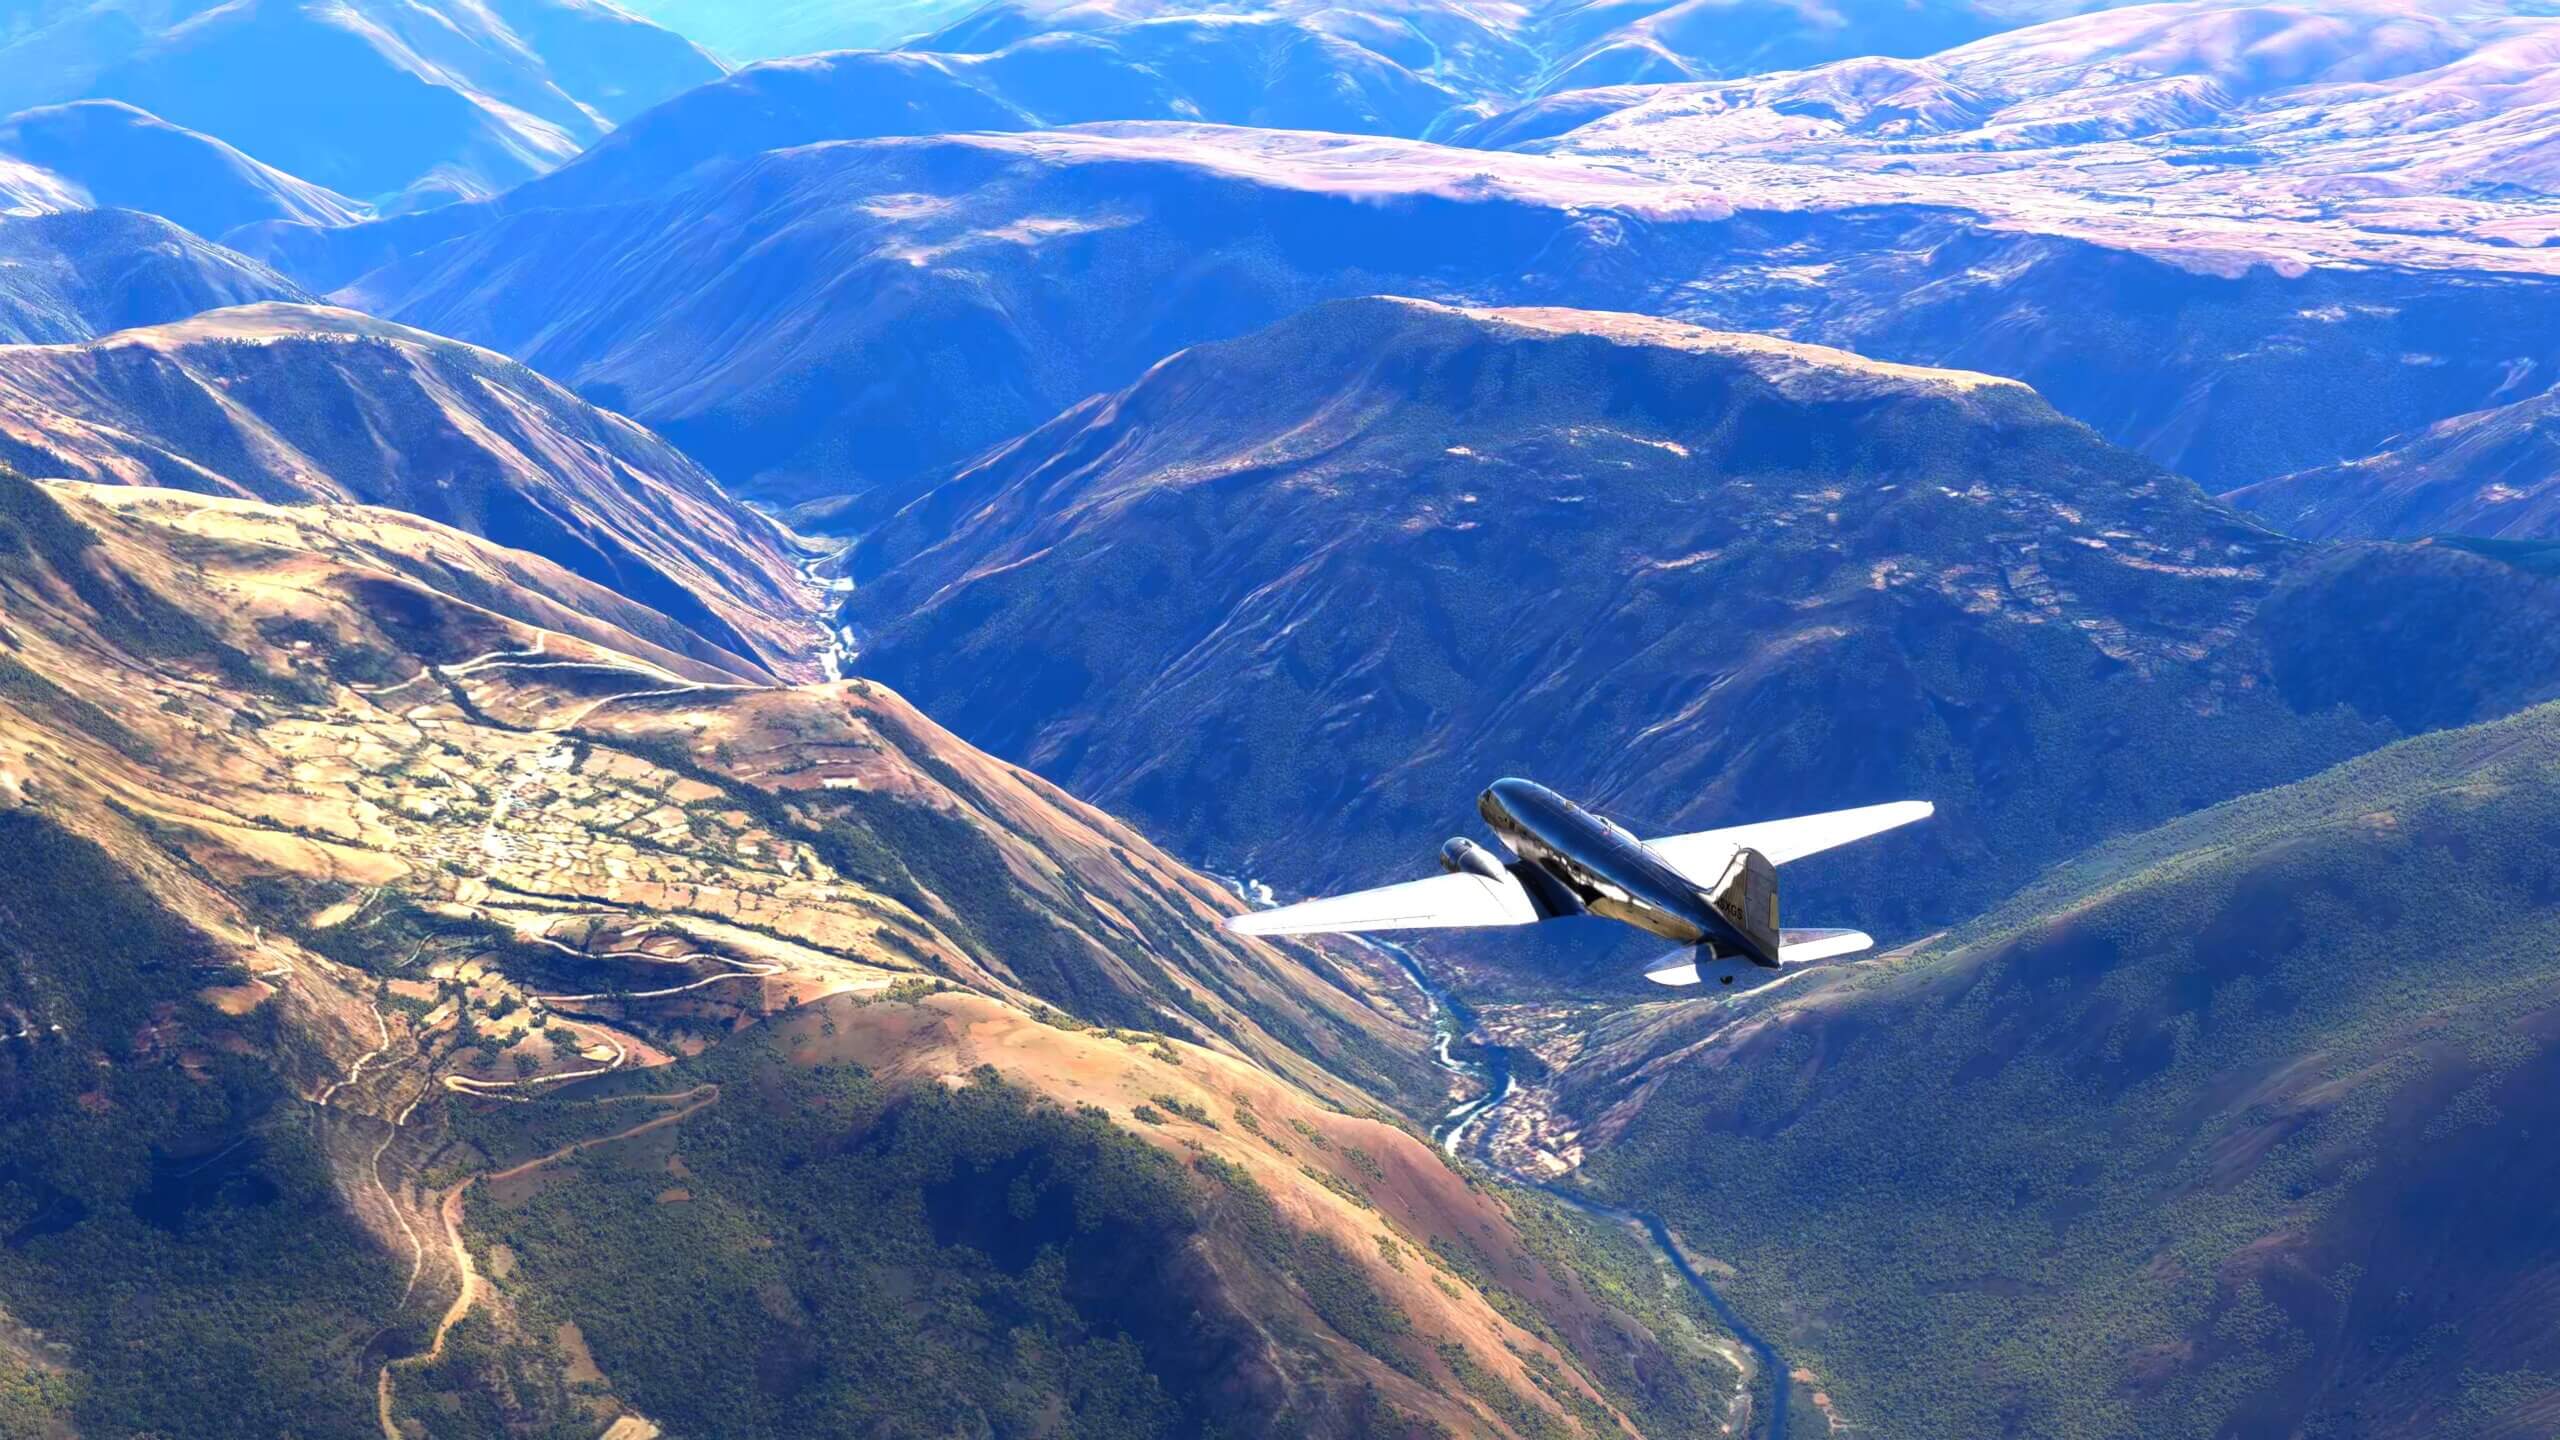 A DC-3 flies towards a valley in between high terrain, with a river flowing through the valley below